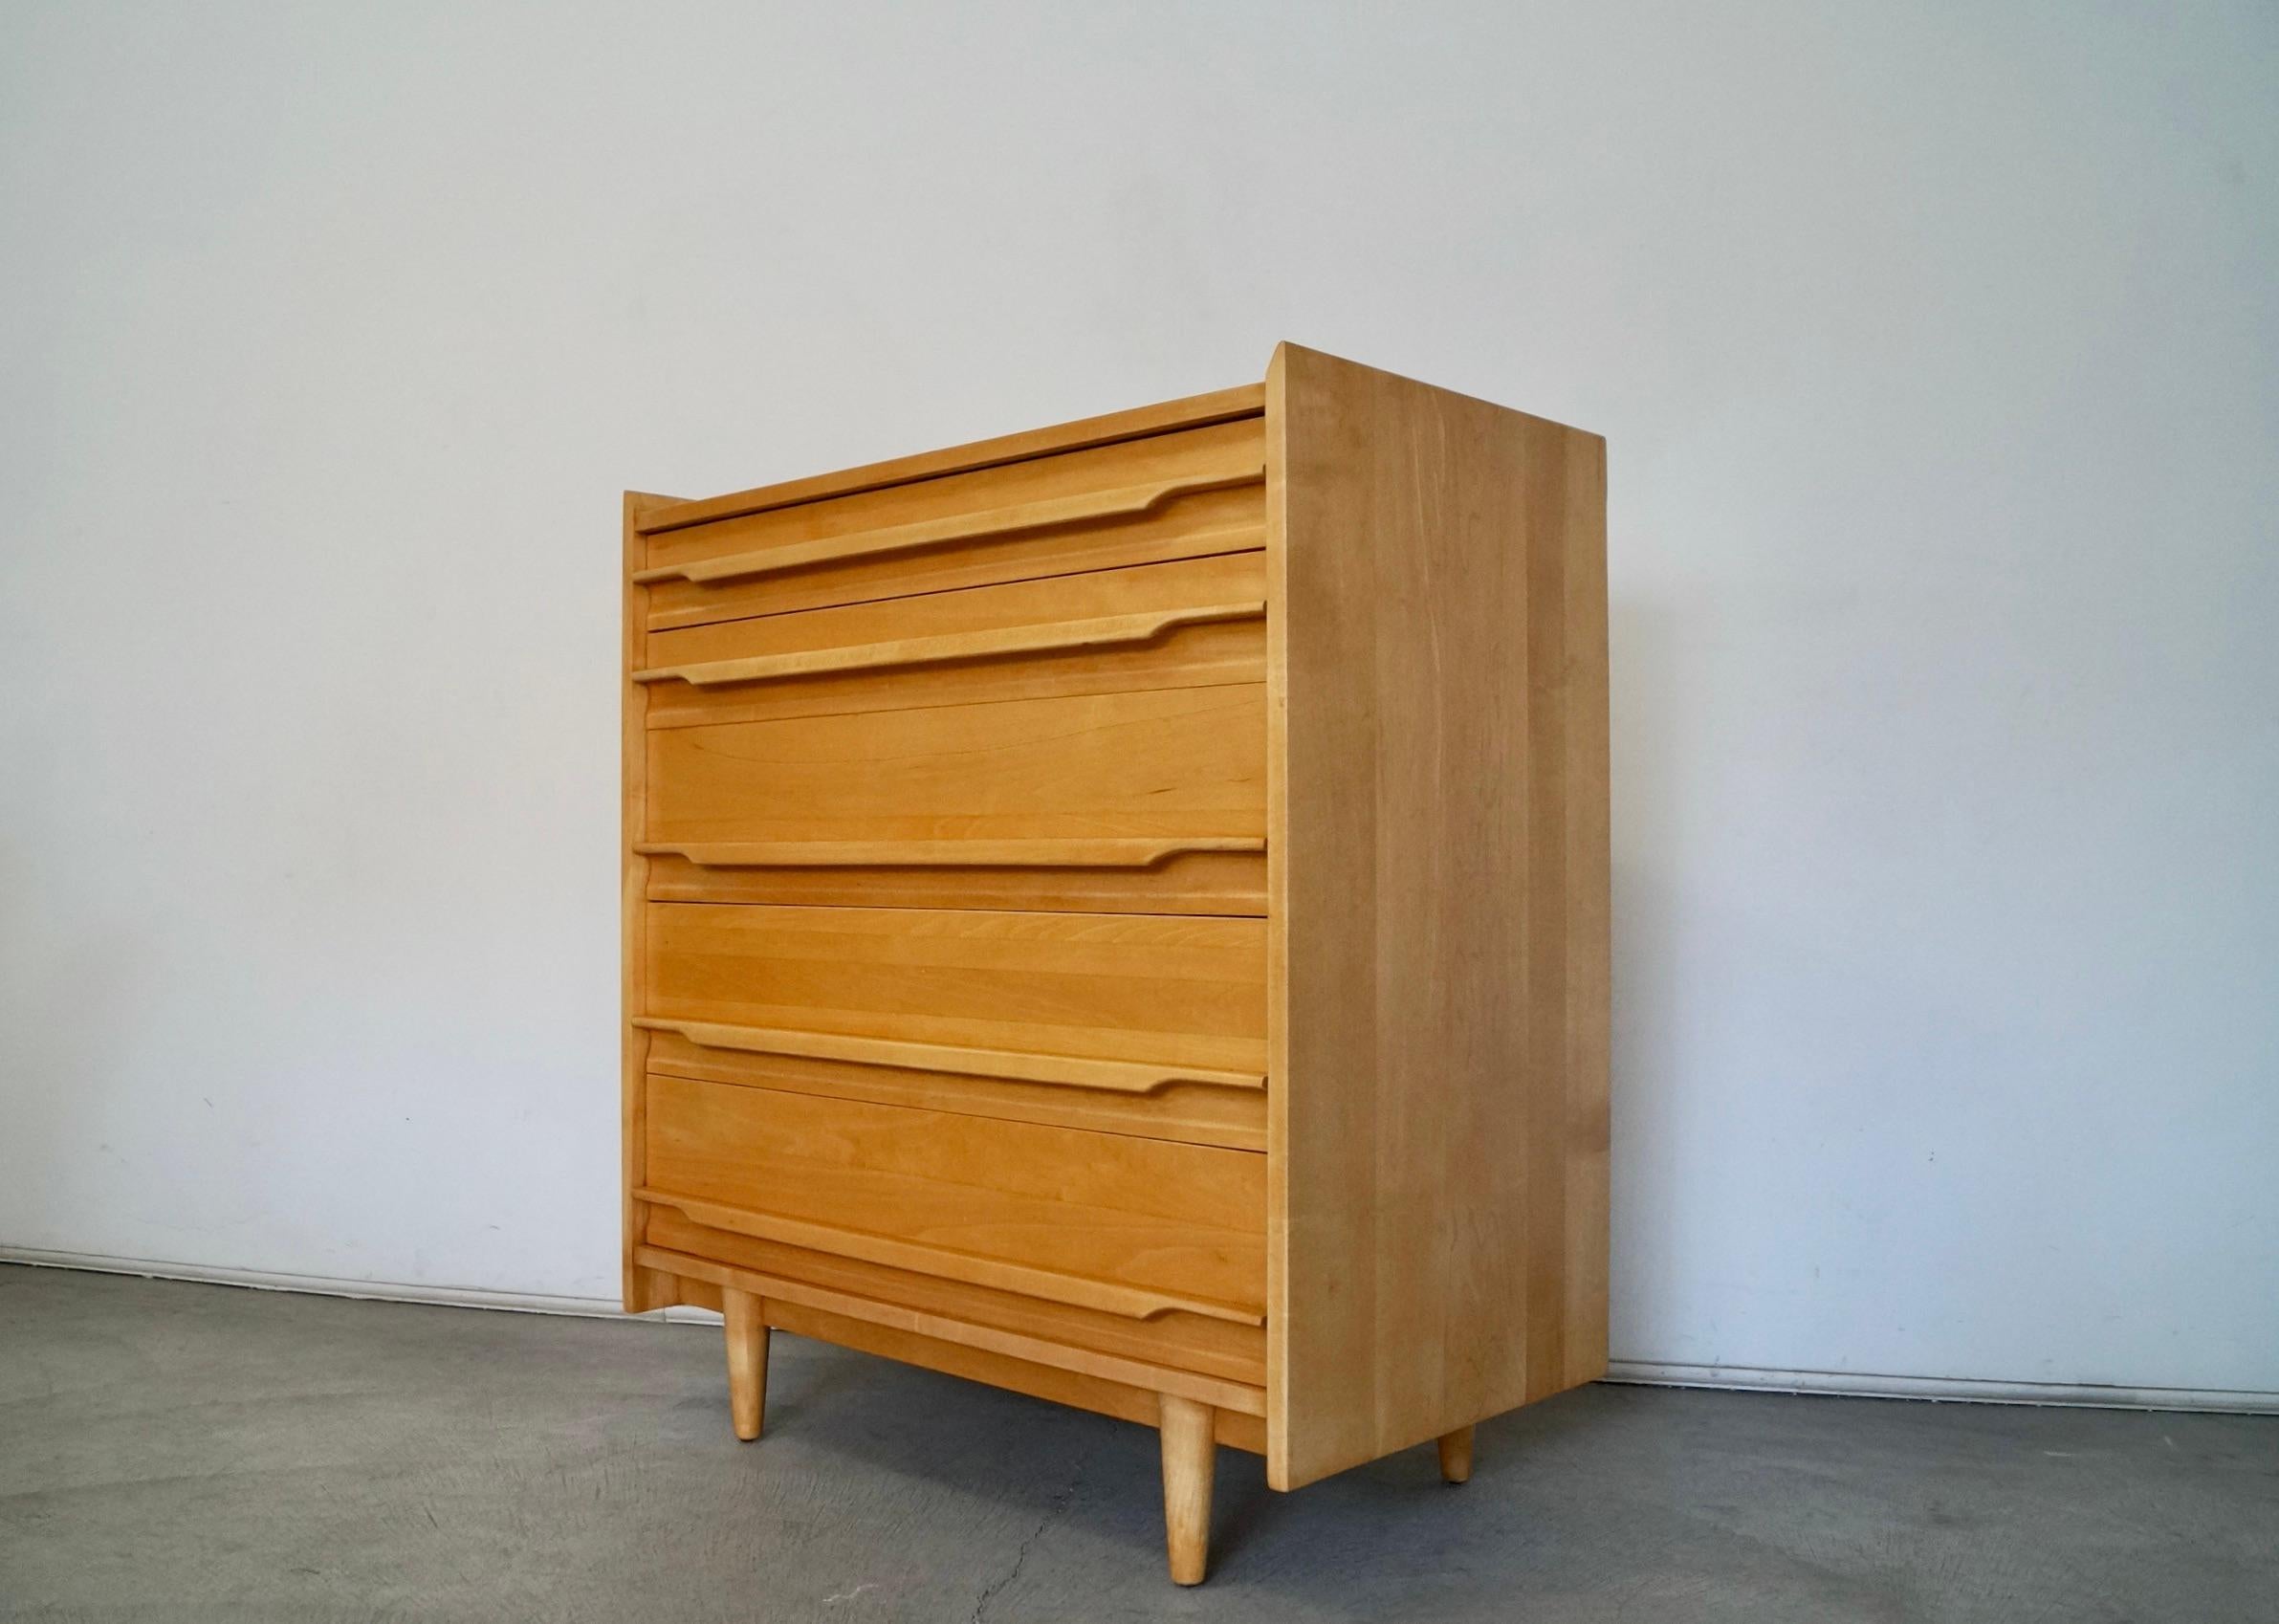 1950's Mid-Century Modern Solid Maple Dresser by Crawford In Excellent Condition For Sale In Burbank, CA